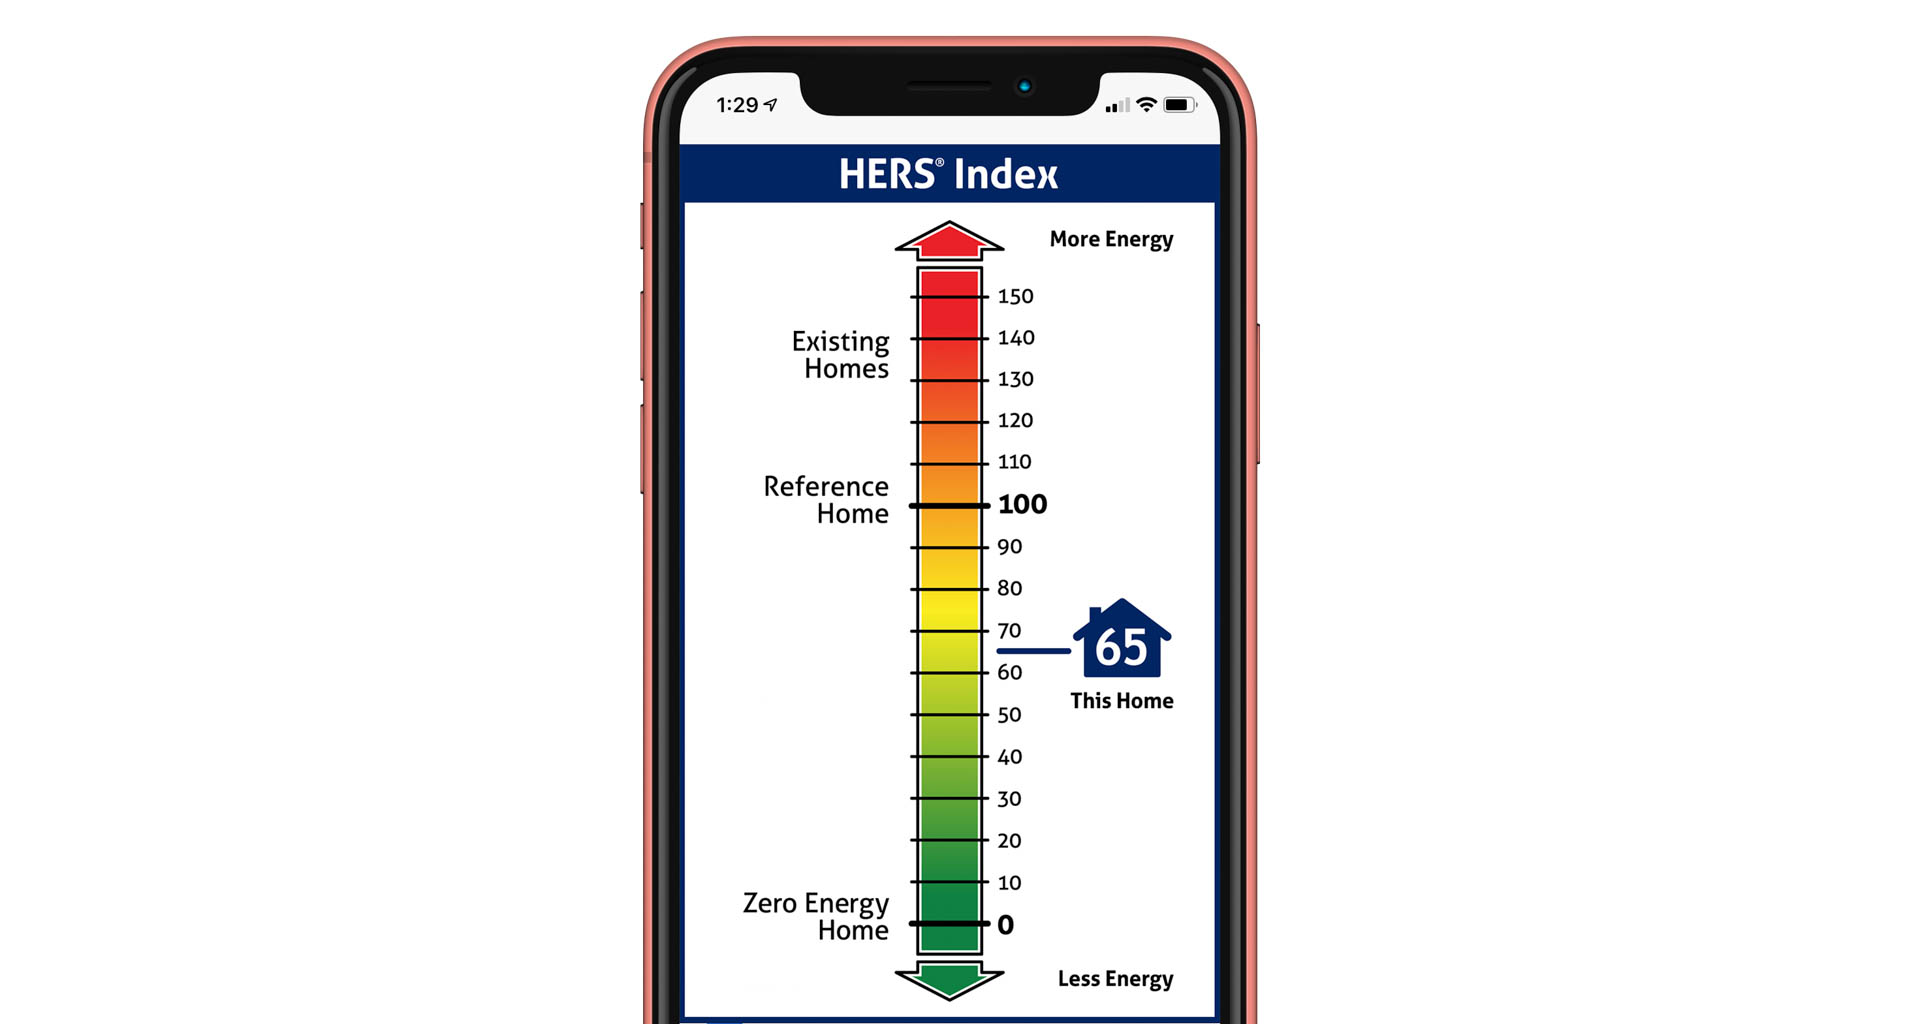 Be sure to check the HERS index score for a home you are considering to understand its relative energy usage compared to other homes. Image: Digitized House Media.